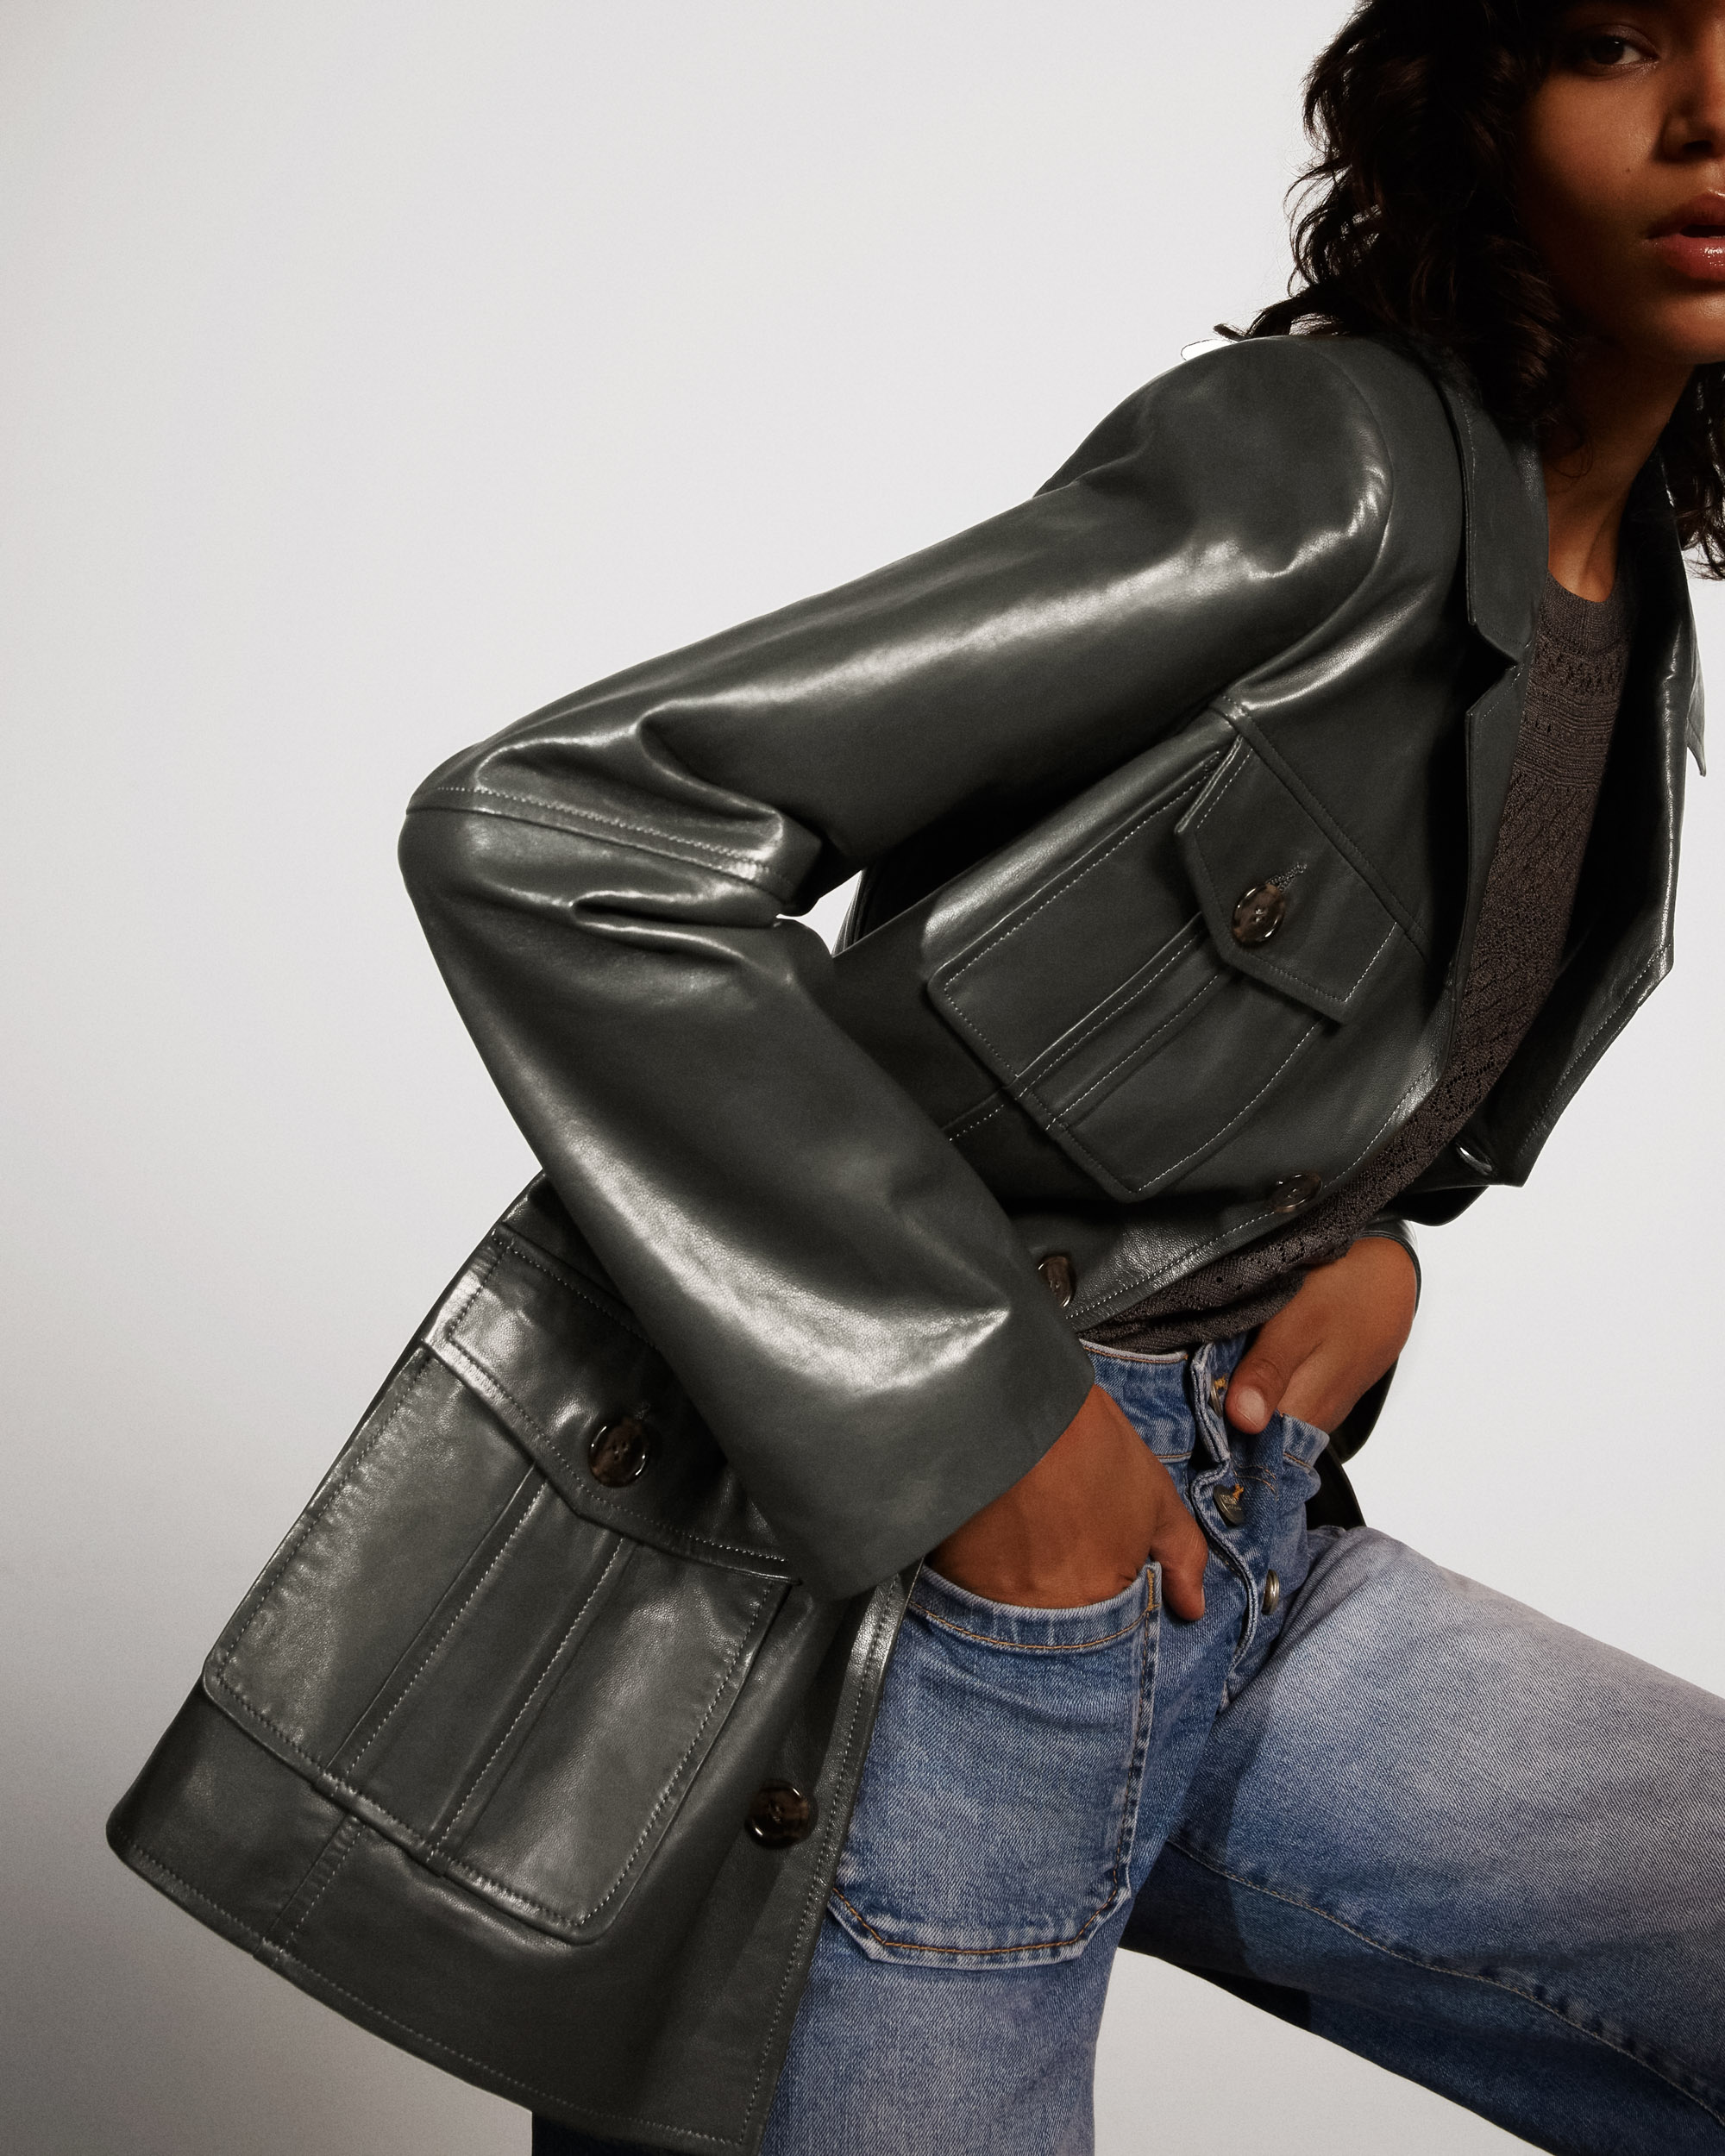 Leather Loves X Nour Hammour: ‘The best jacket you’ll ever own!’